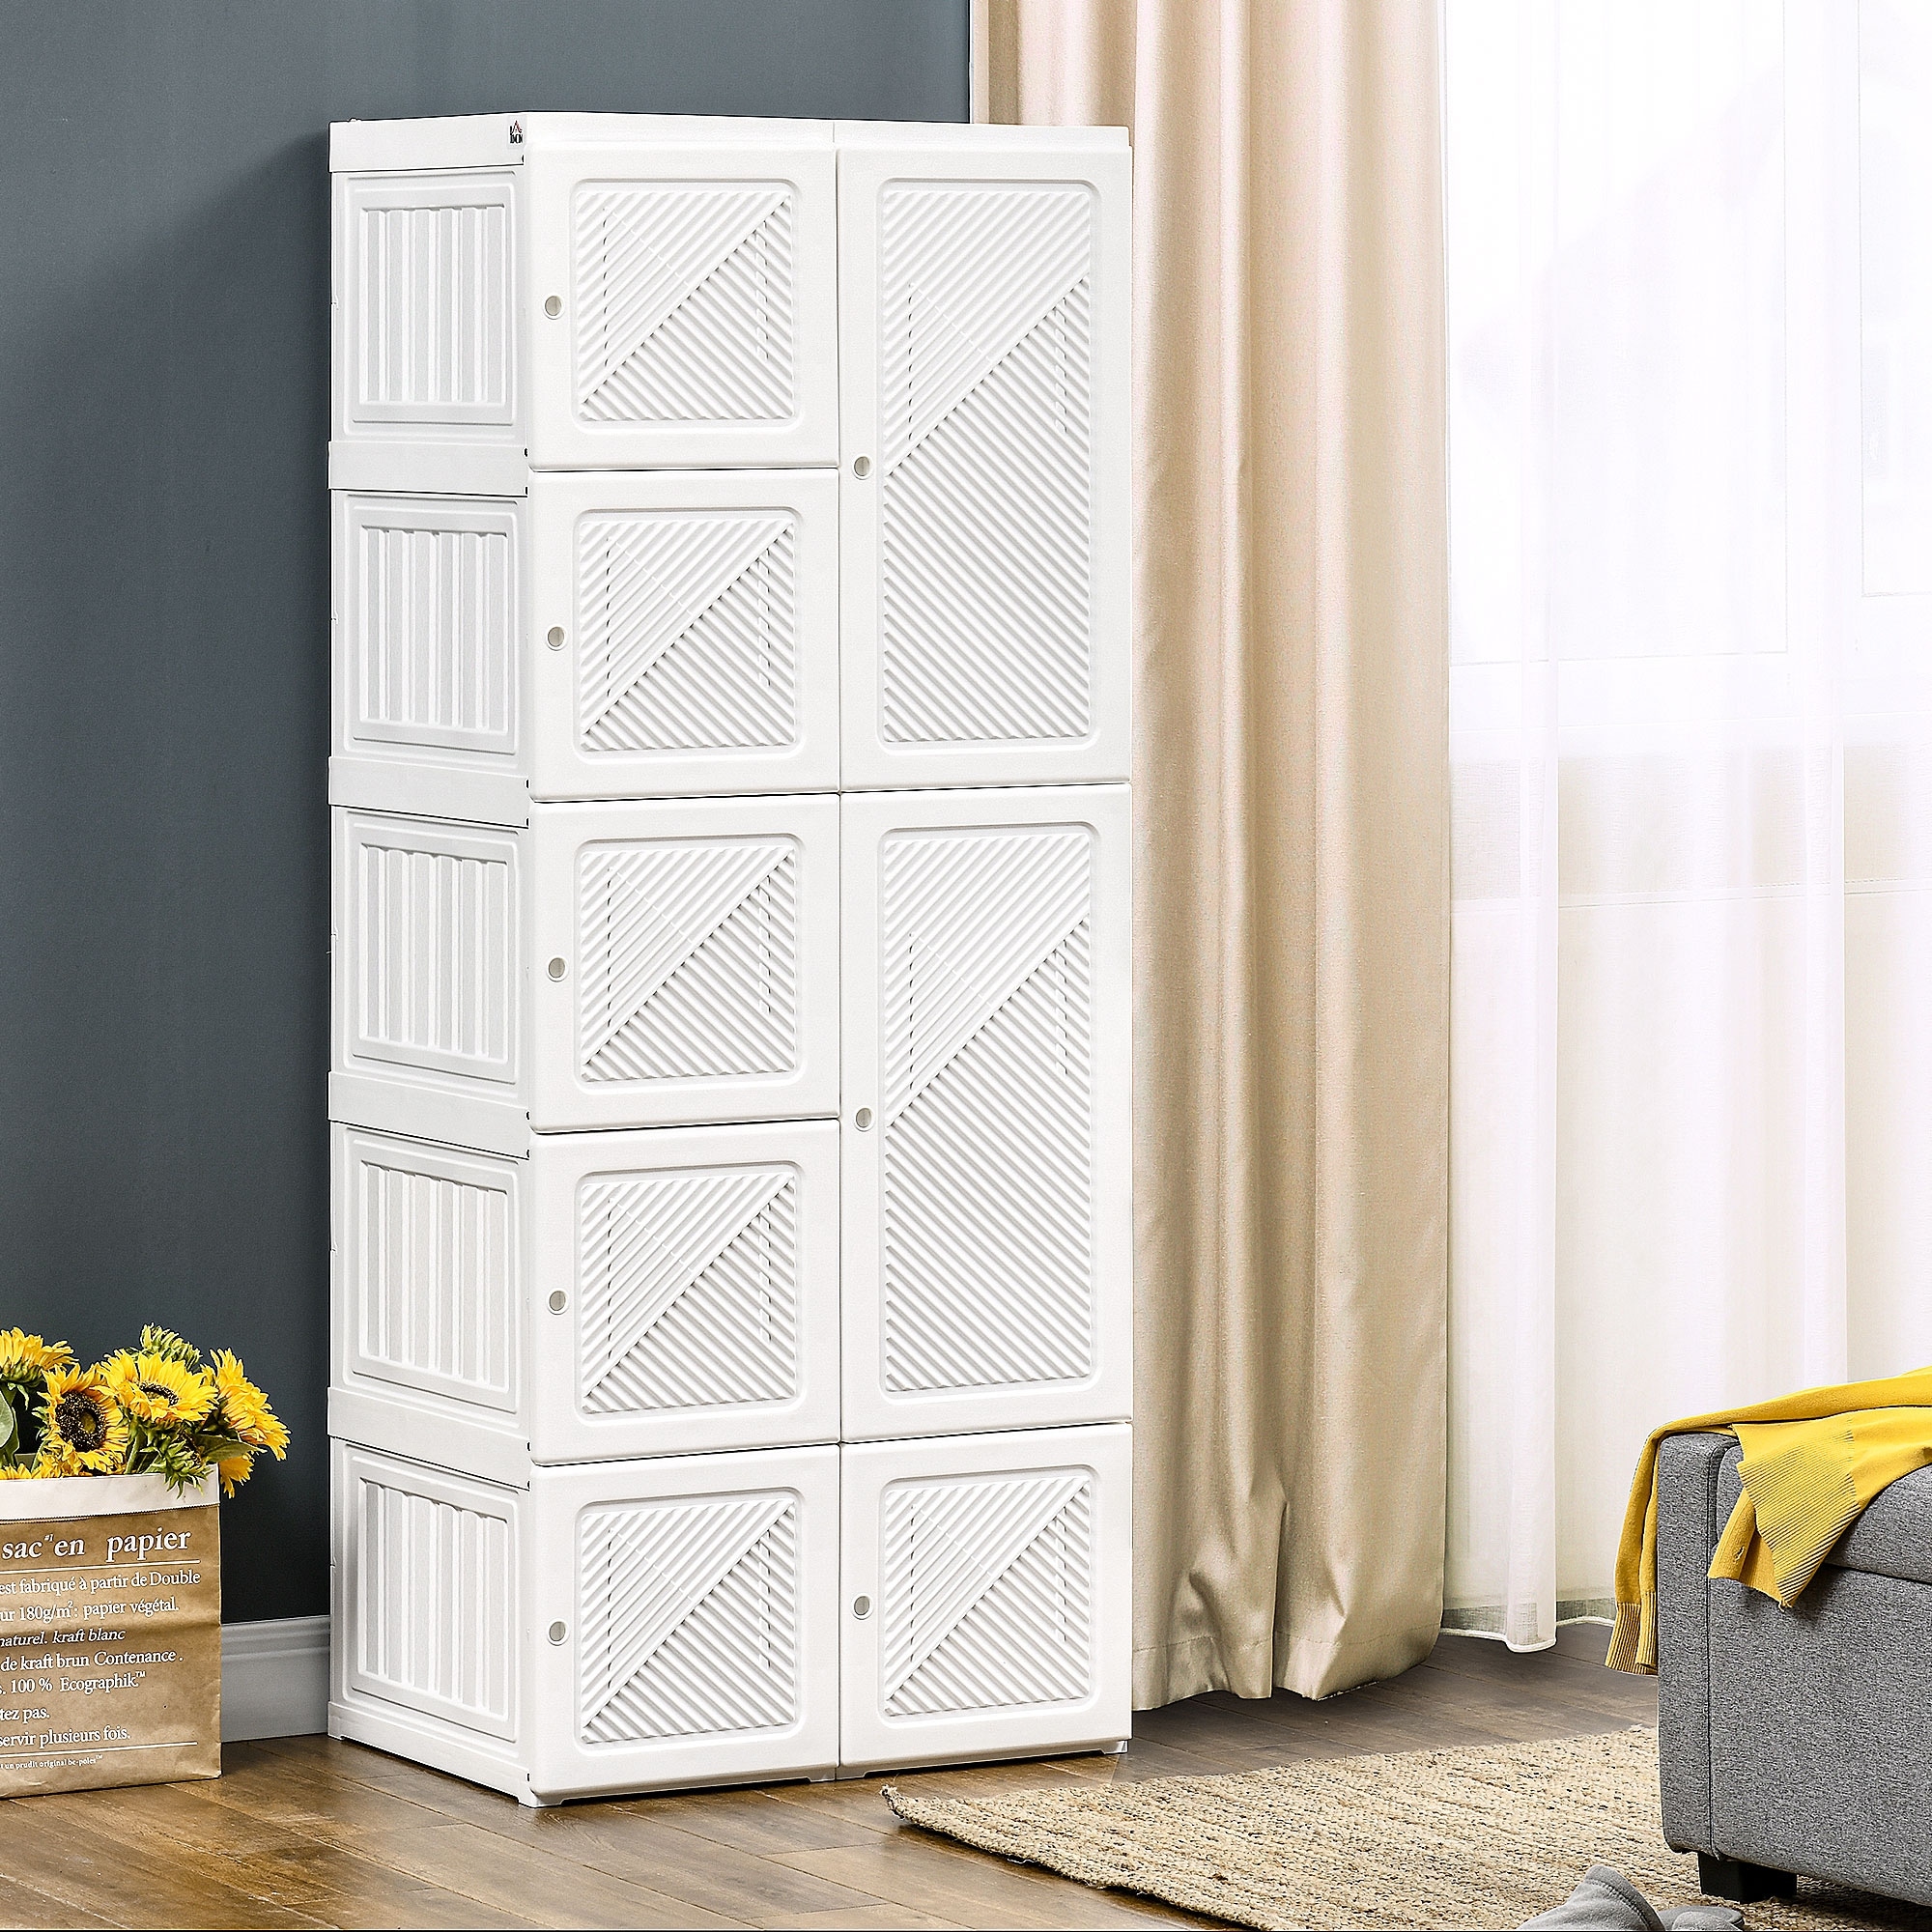 https://ak1.ostkcdn.com/images/products/is/images/direct/da9c1e38e2bb79ce28f371d6f8b8c86357931cbc/HOMCOM-Portable-Wardrobe-Closet%2C-Clothes-Storage-Organizer-with-Cube-Compartments%2C-Hanging-Rod%2C-Magnet-Doors.jpg